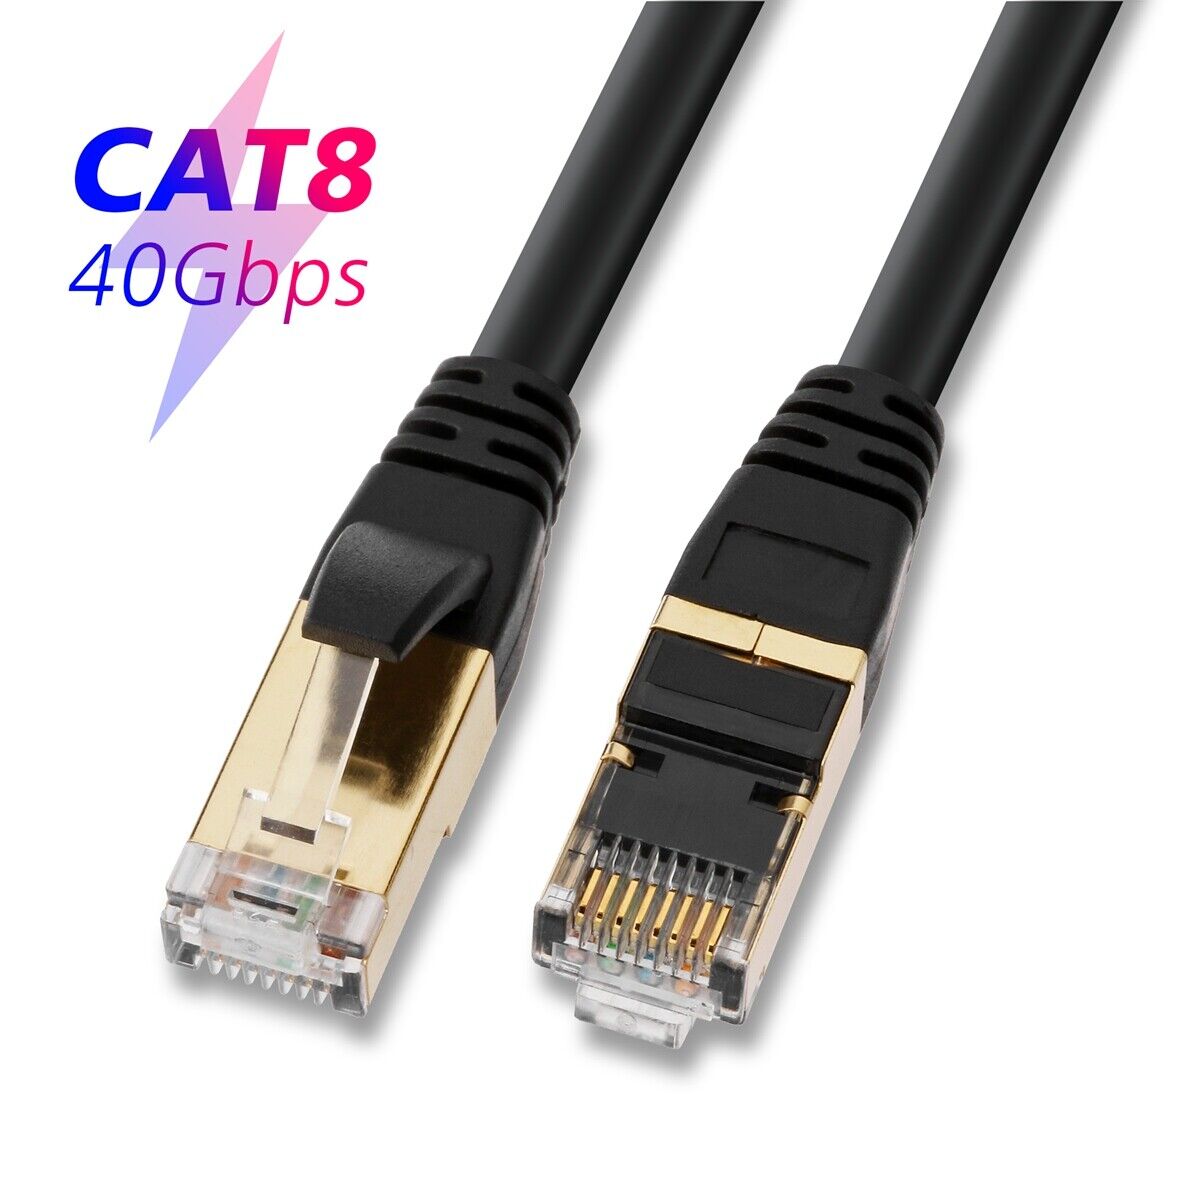 Cat8 Cat 7 6 5e Cable Ethernet LAN for Modem,Router,PS3, PS4,Xbox (6ft~66ft) Lot